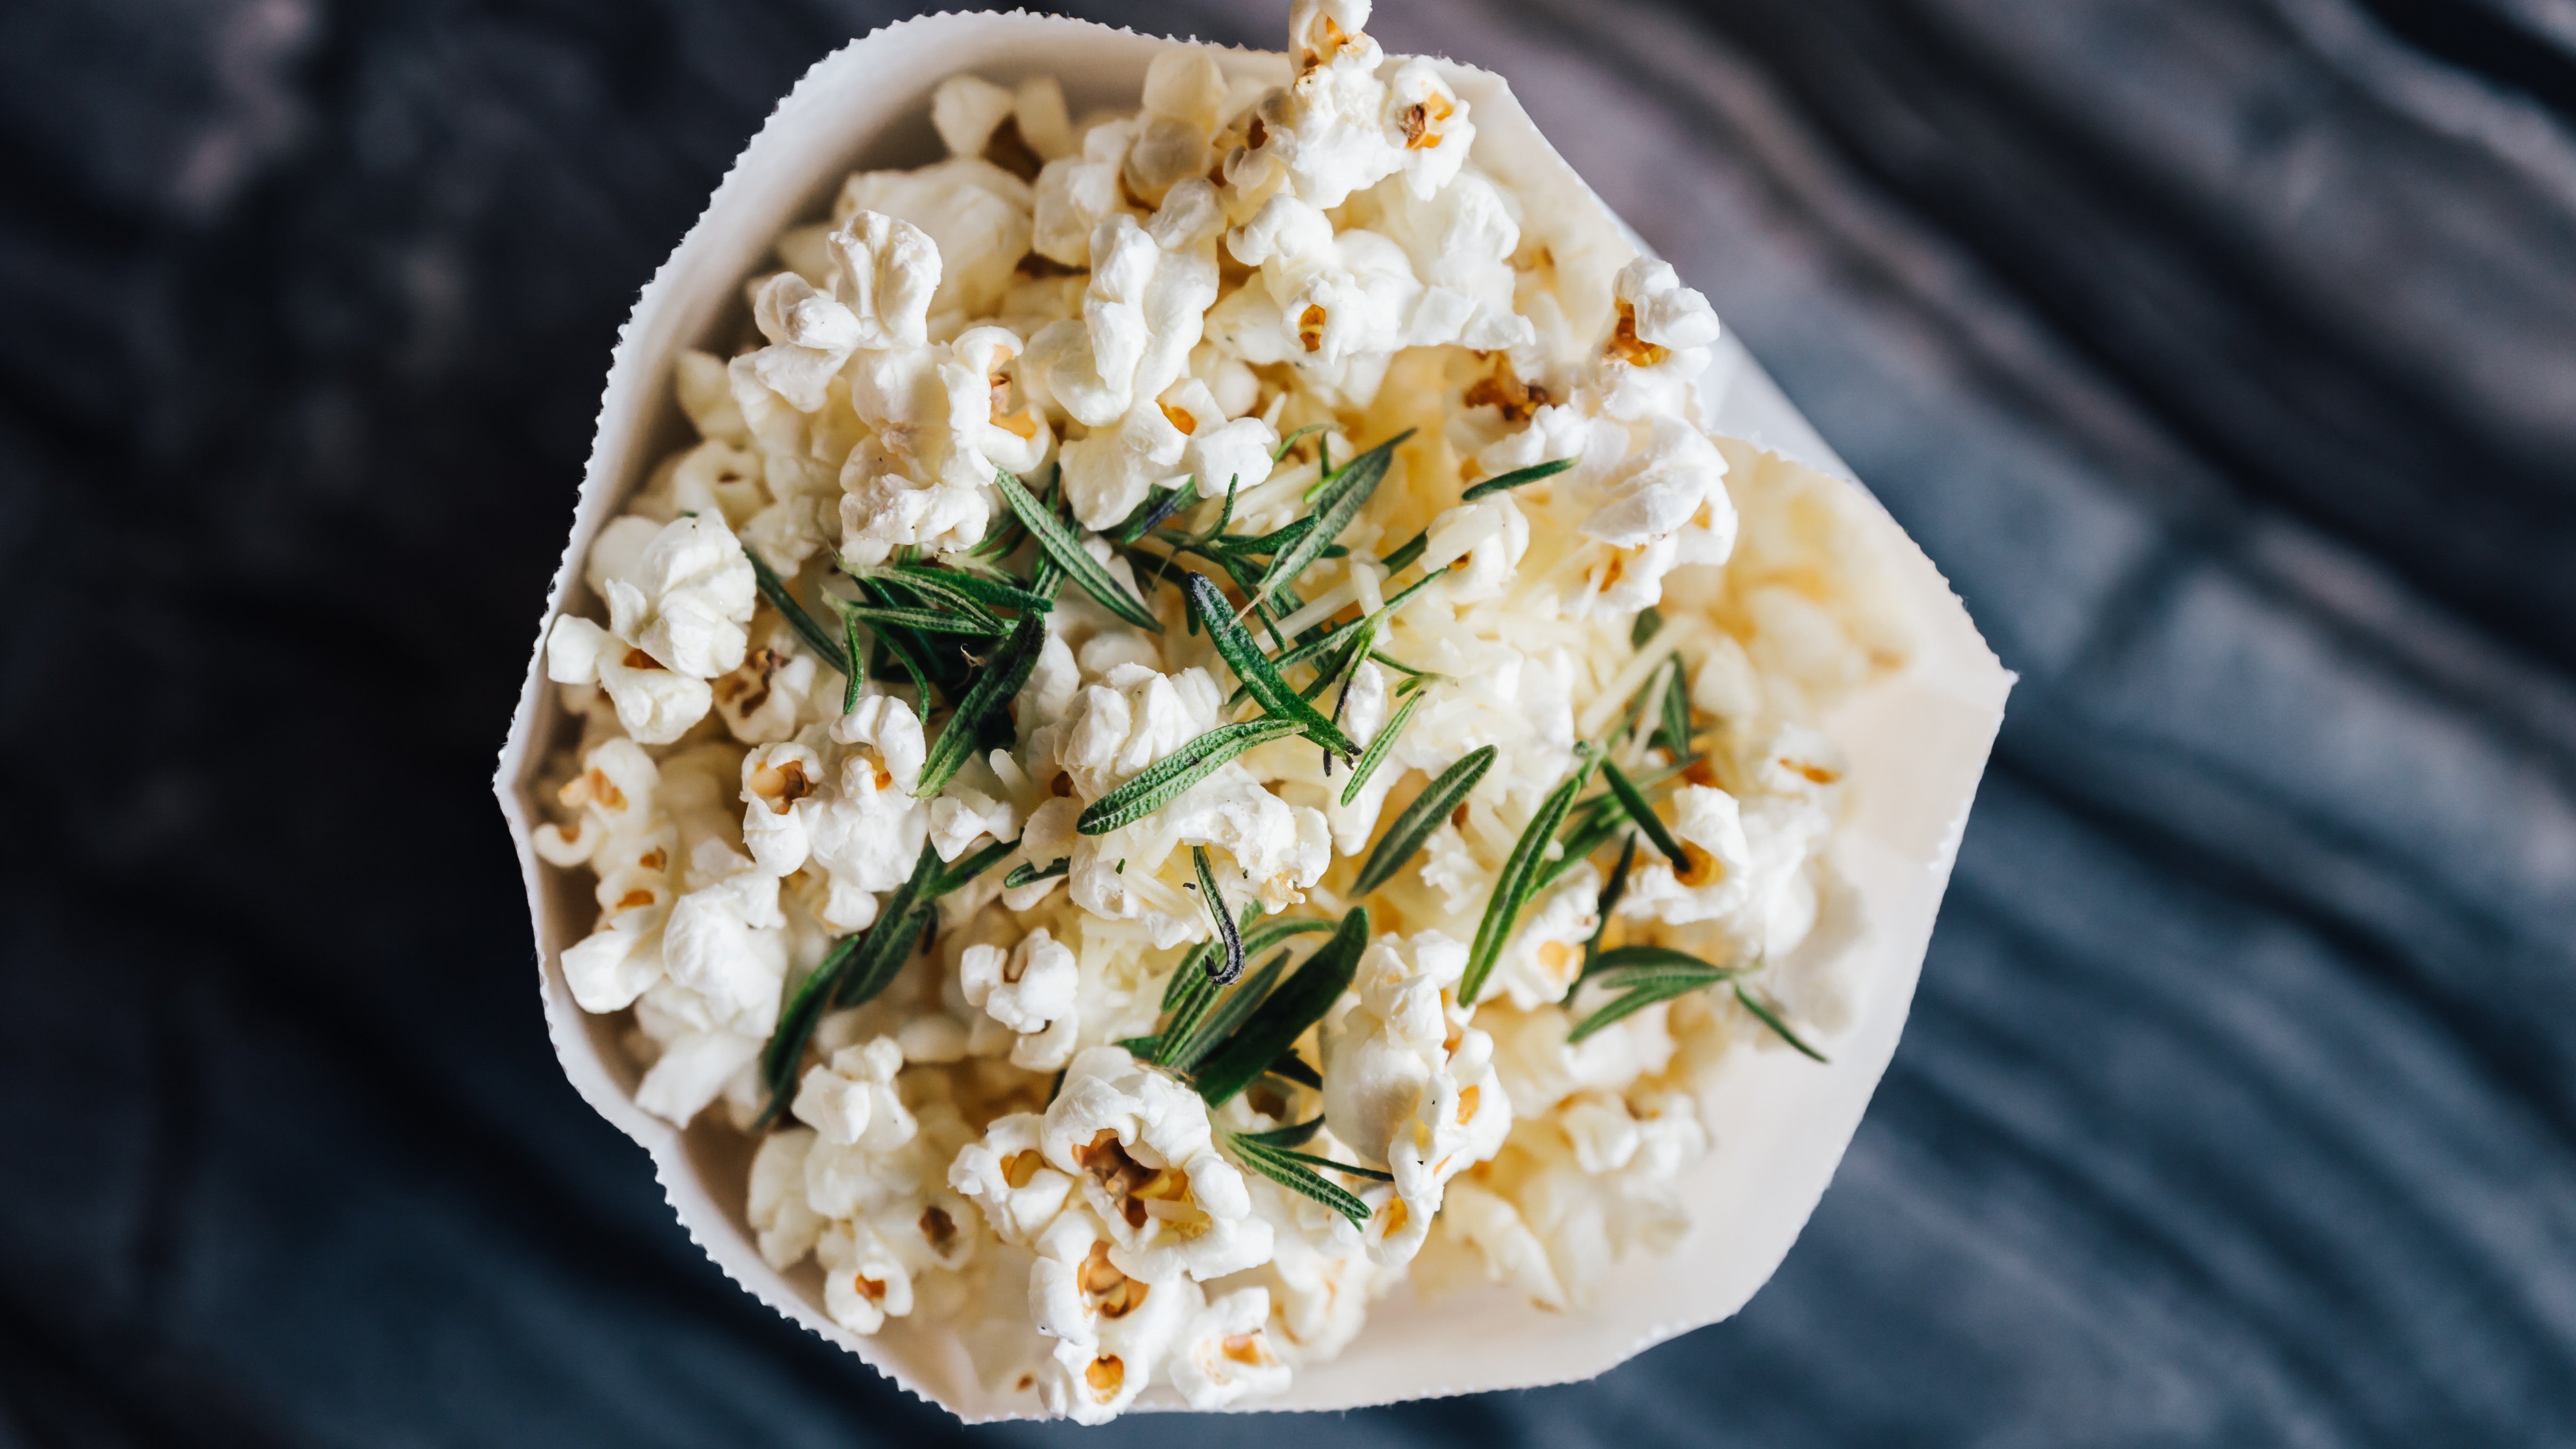 Your Popcorn Needs All The Rosemary You’ve Got